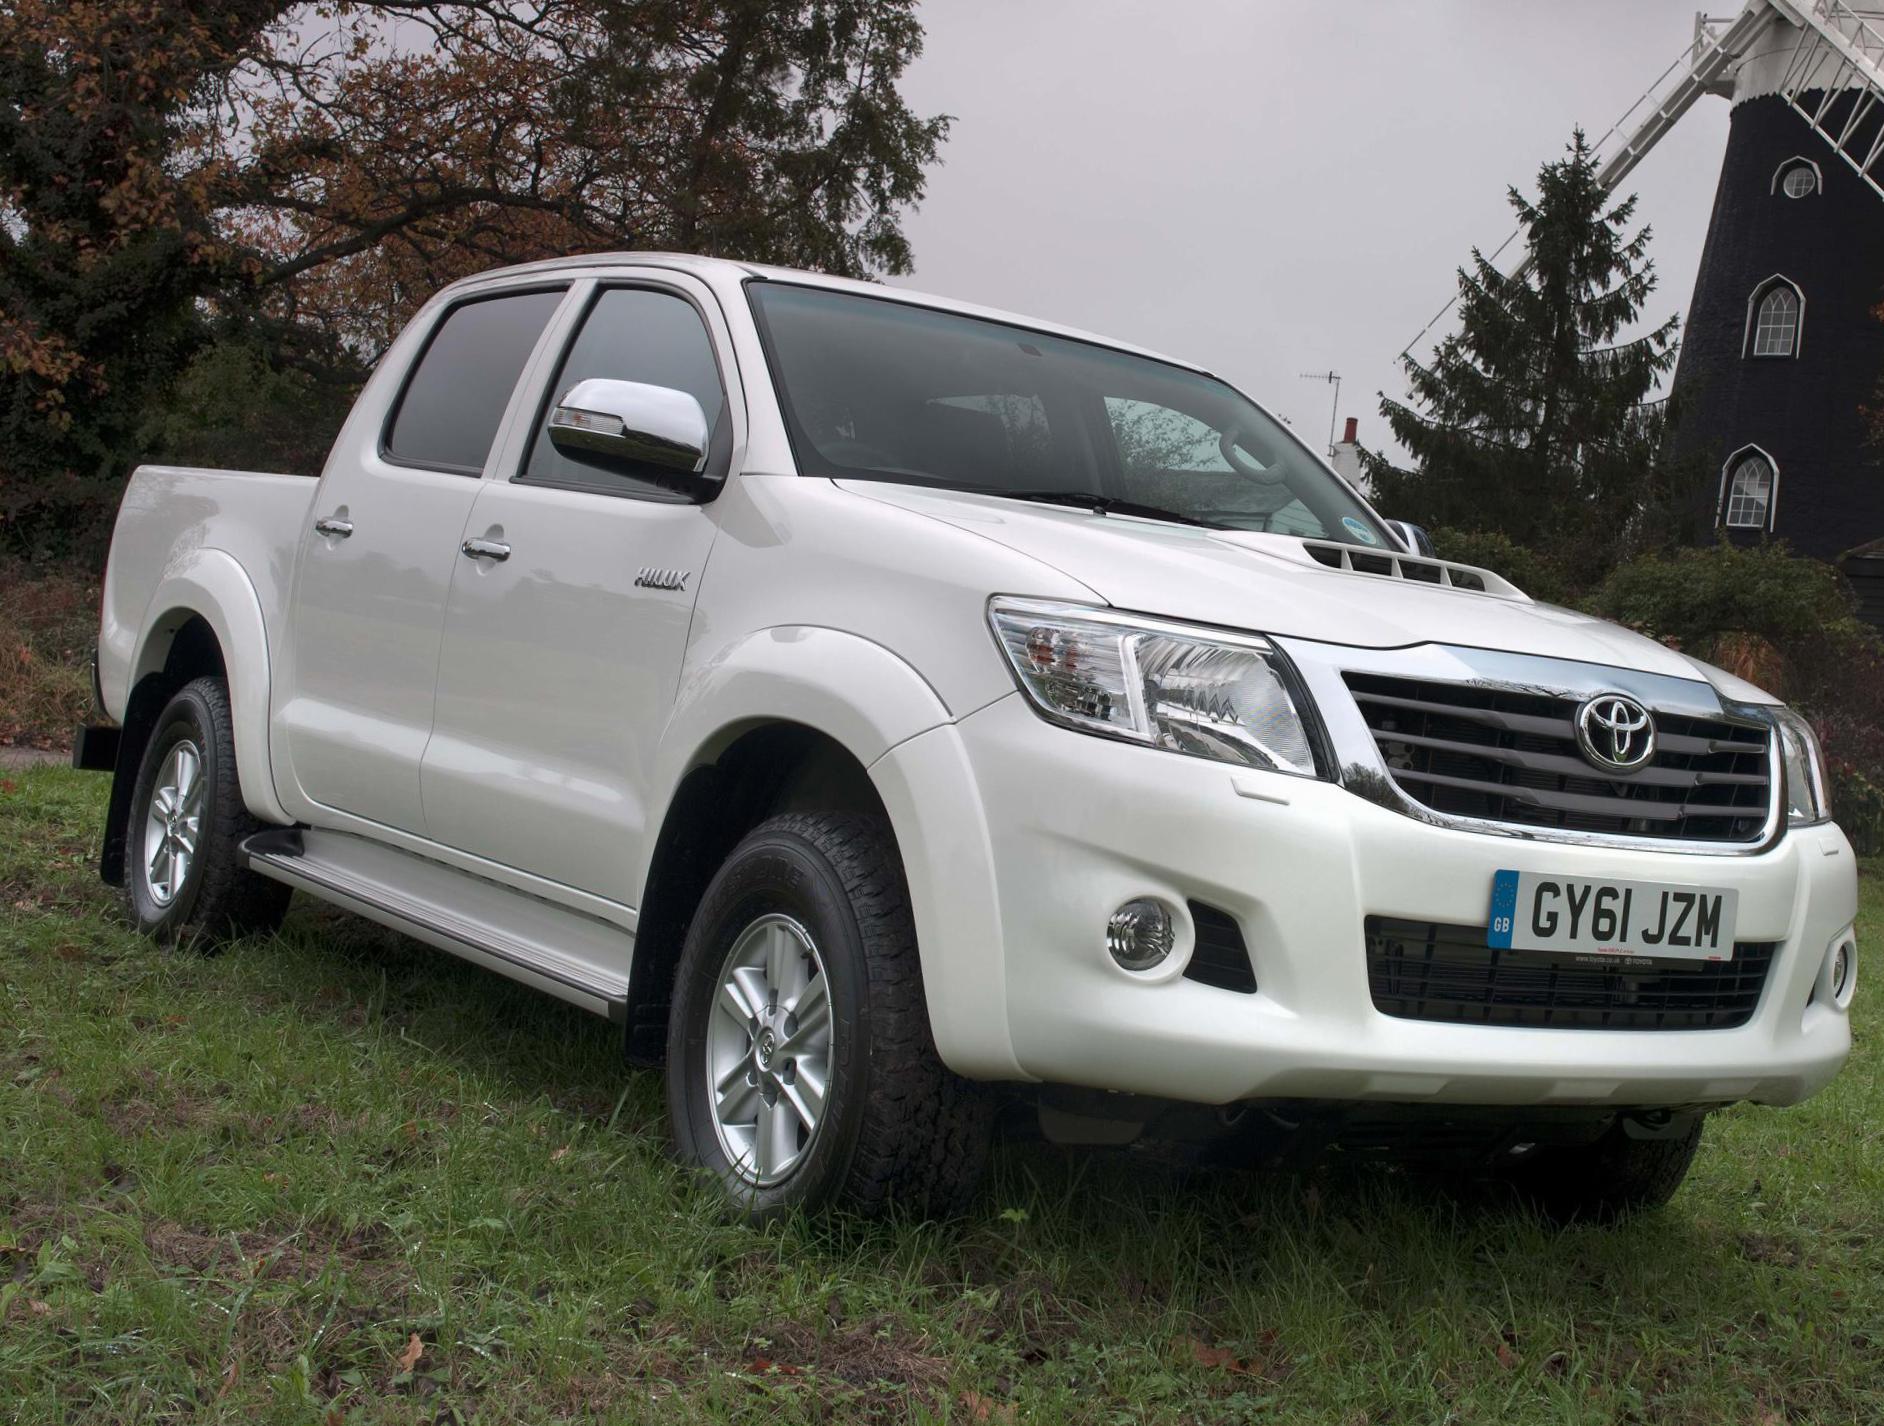 Toyota Hilux Double Cab price suv